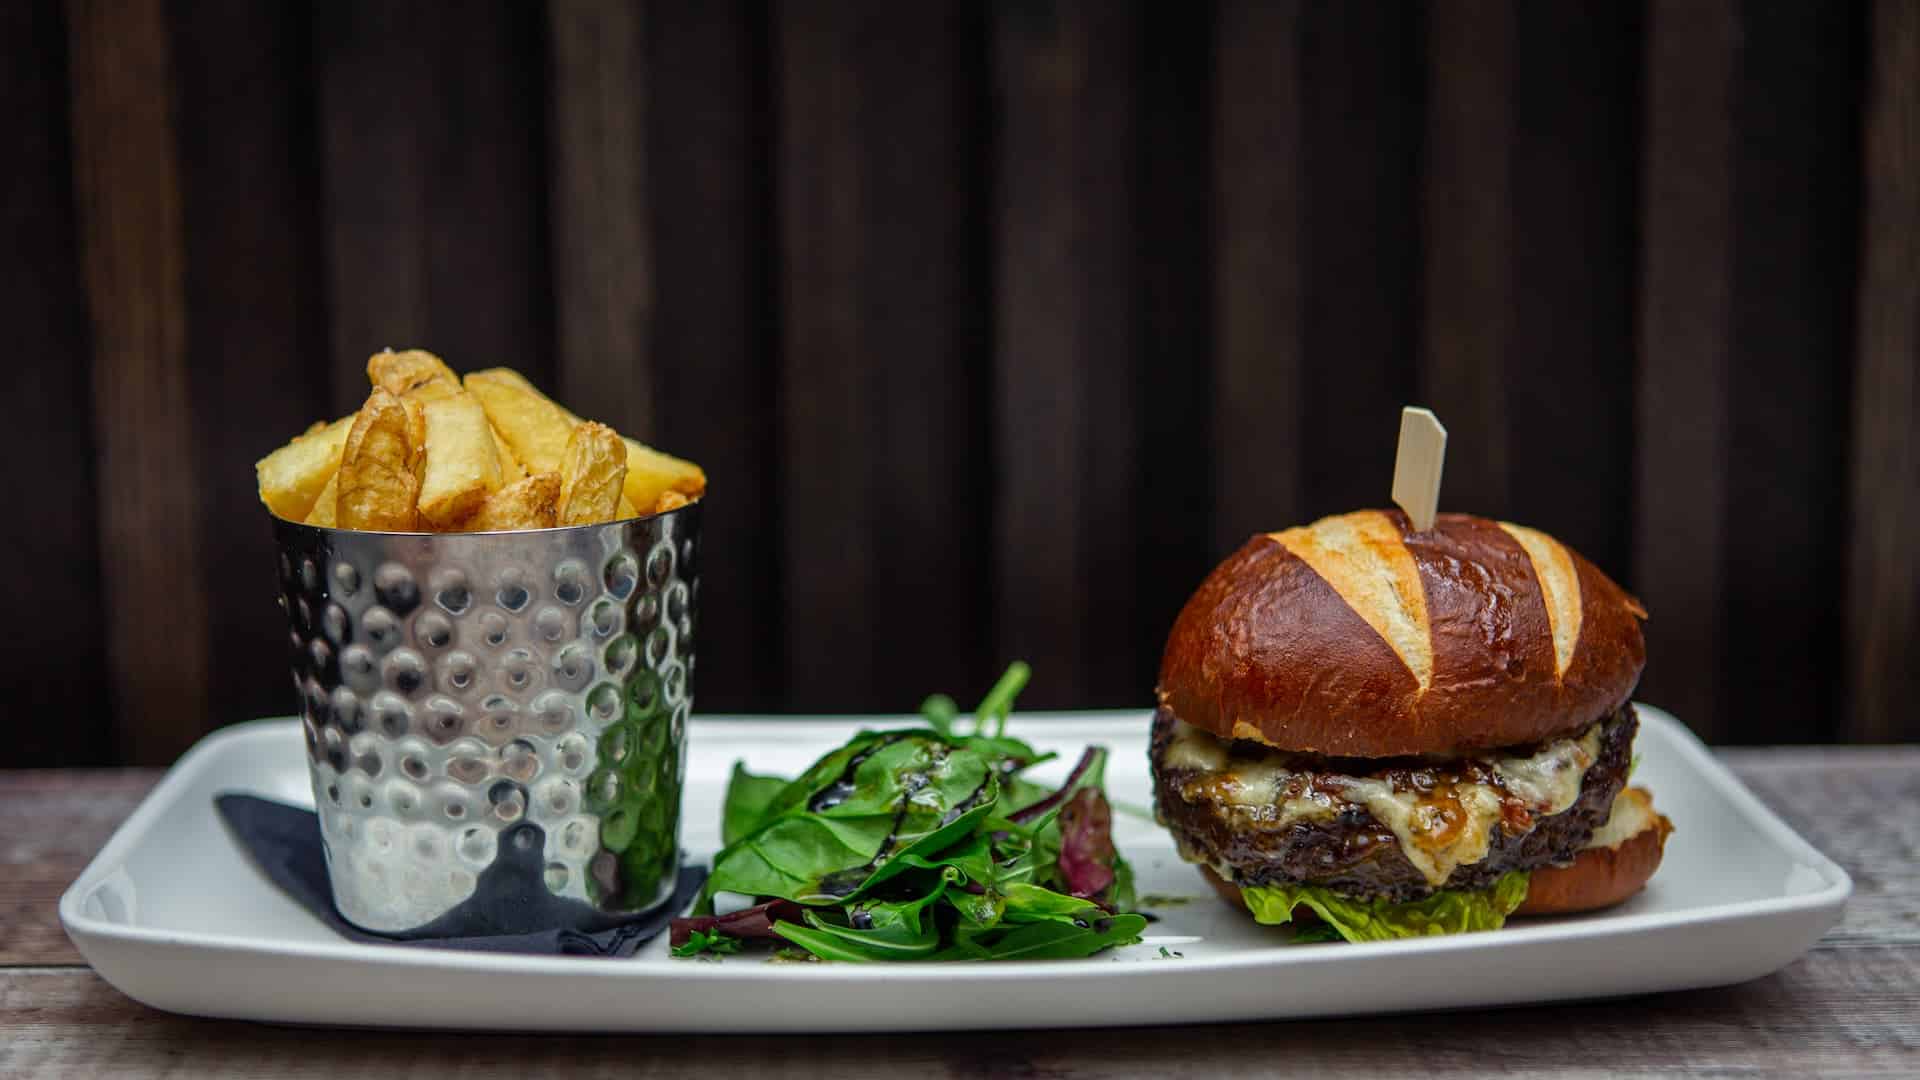 Burger and french fries served at the brasserie